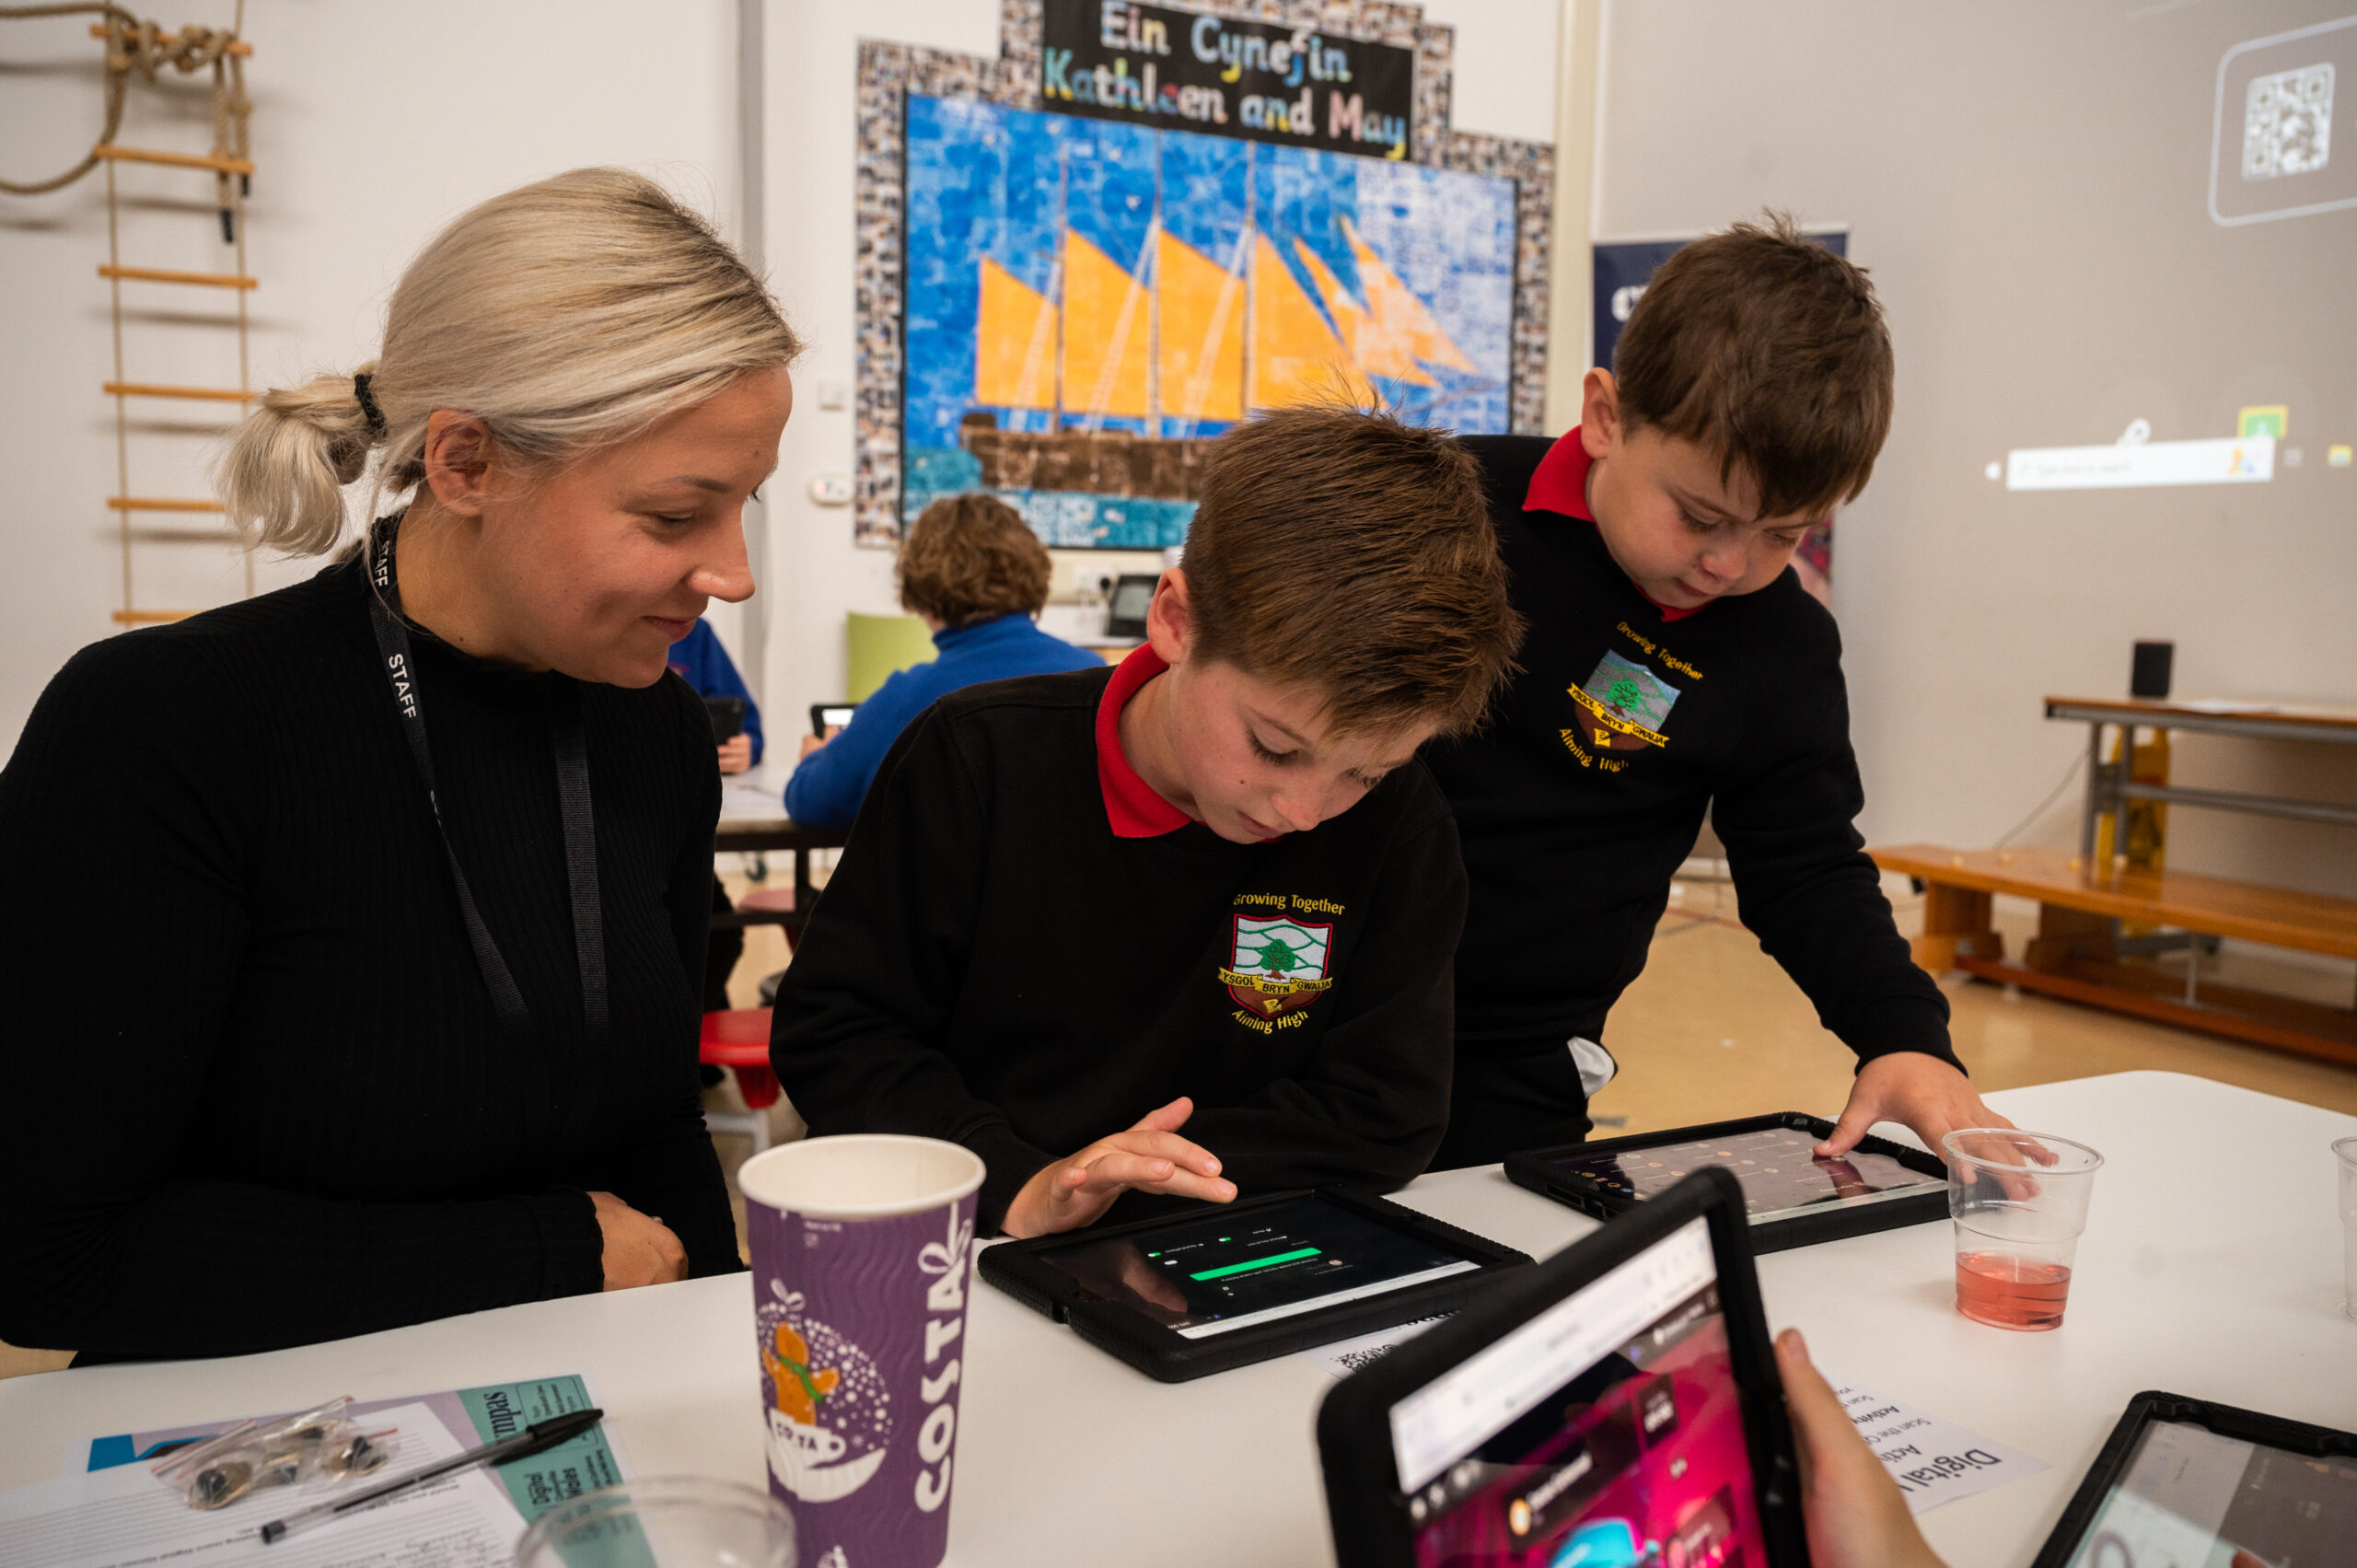 A photograph of two male primary school aged Digital Heroes and their teacher using two tablet devices.